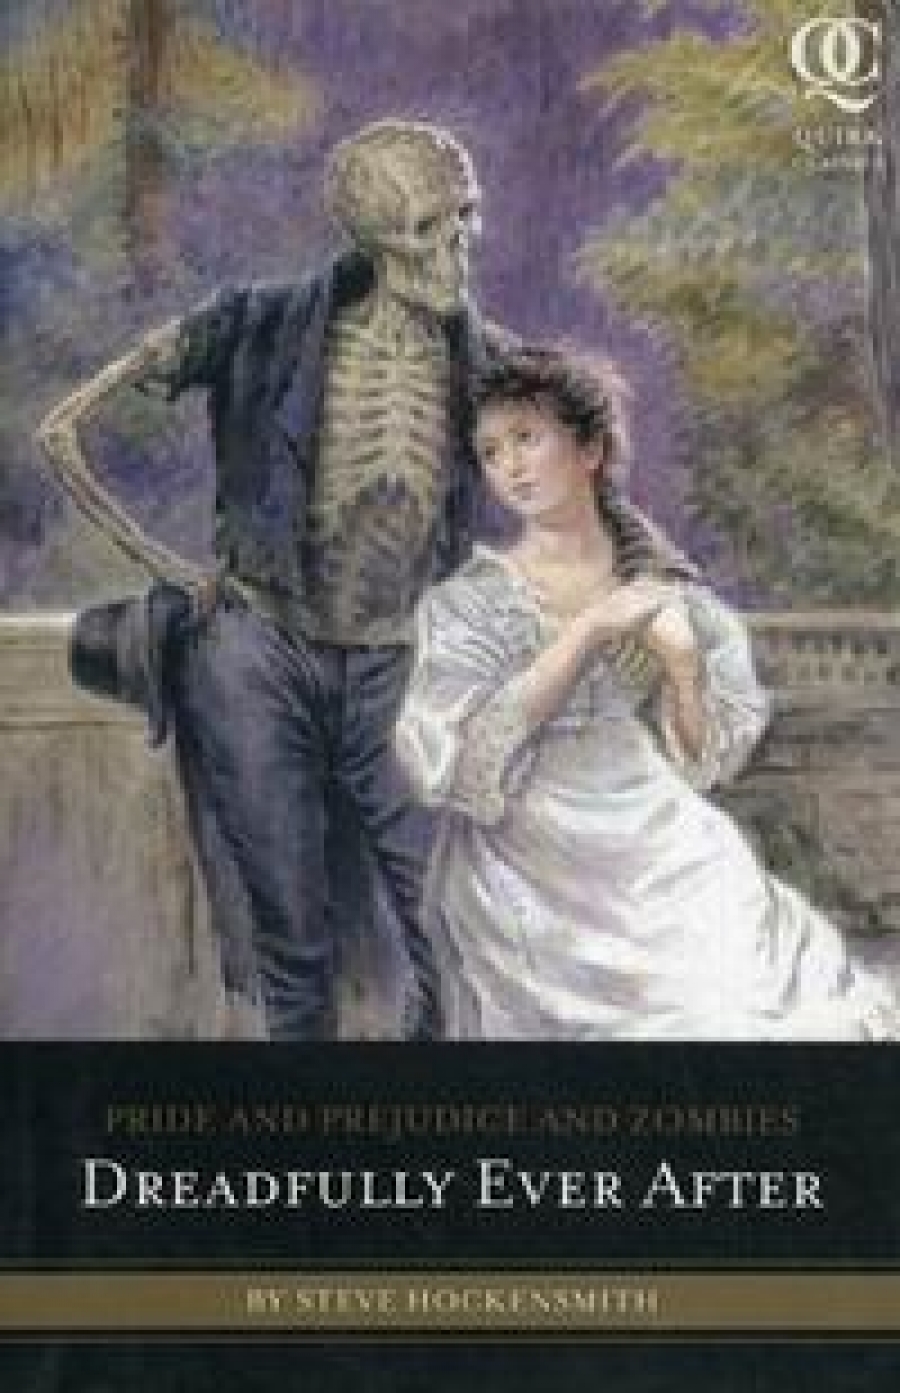 Hockensmith S. Pride and Prejudice and Zombies: Dreadfully Ever After 